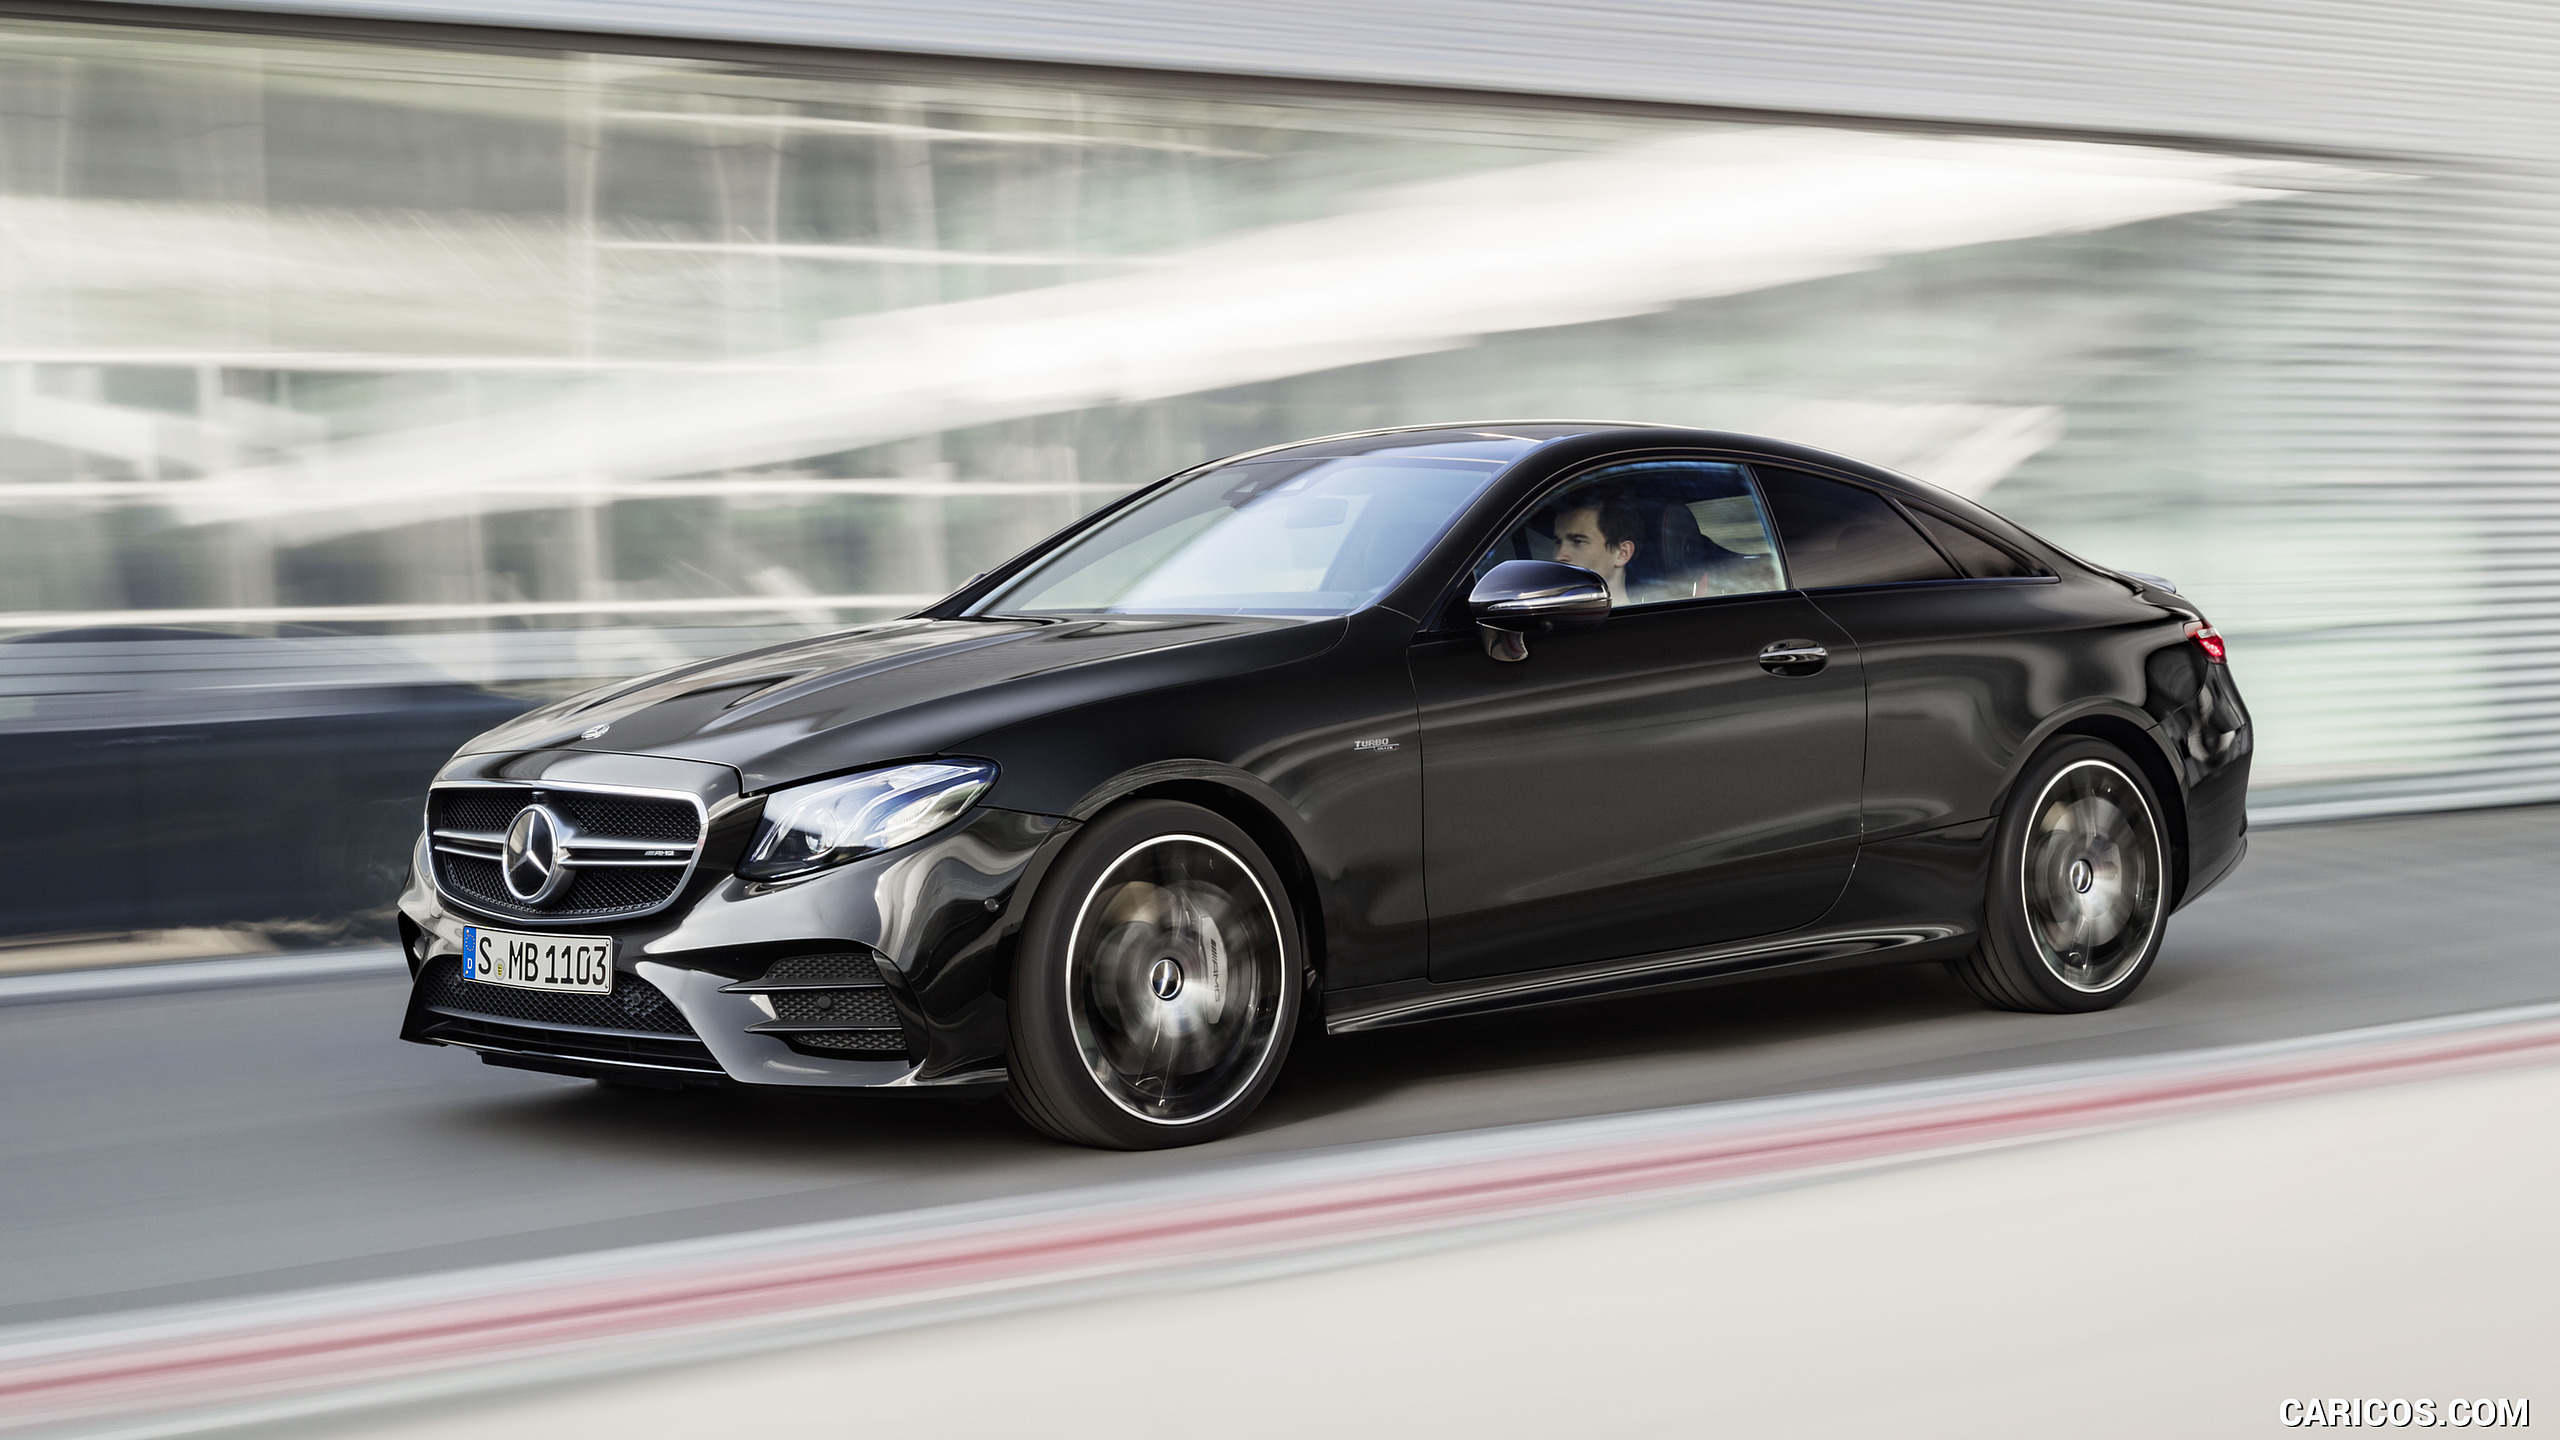 2019 Mercedes-AMG E 53 Coupe 4MATIC+ (Color: Obsidian Black Metallic) - Front Three-Quarter, #2 of 193